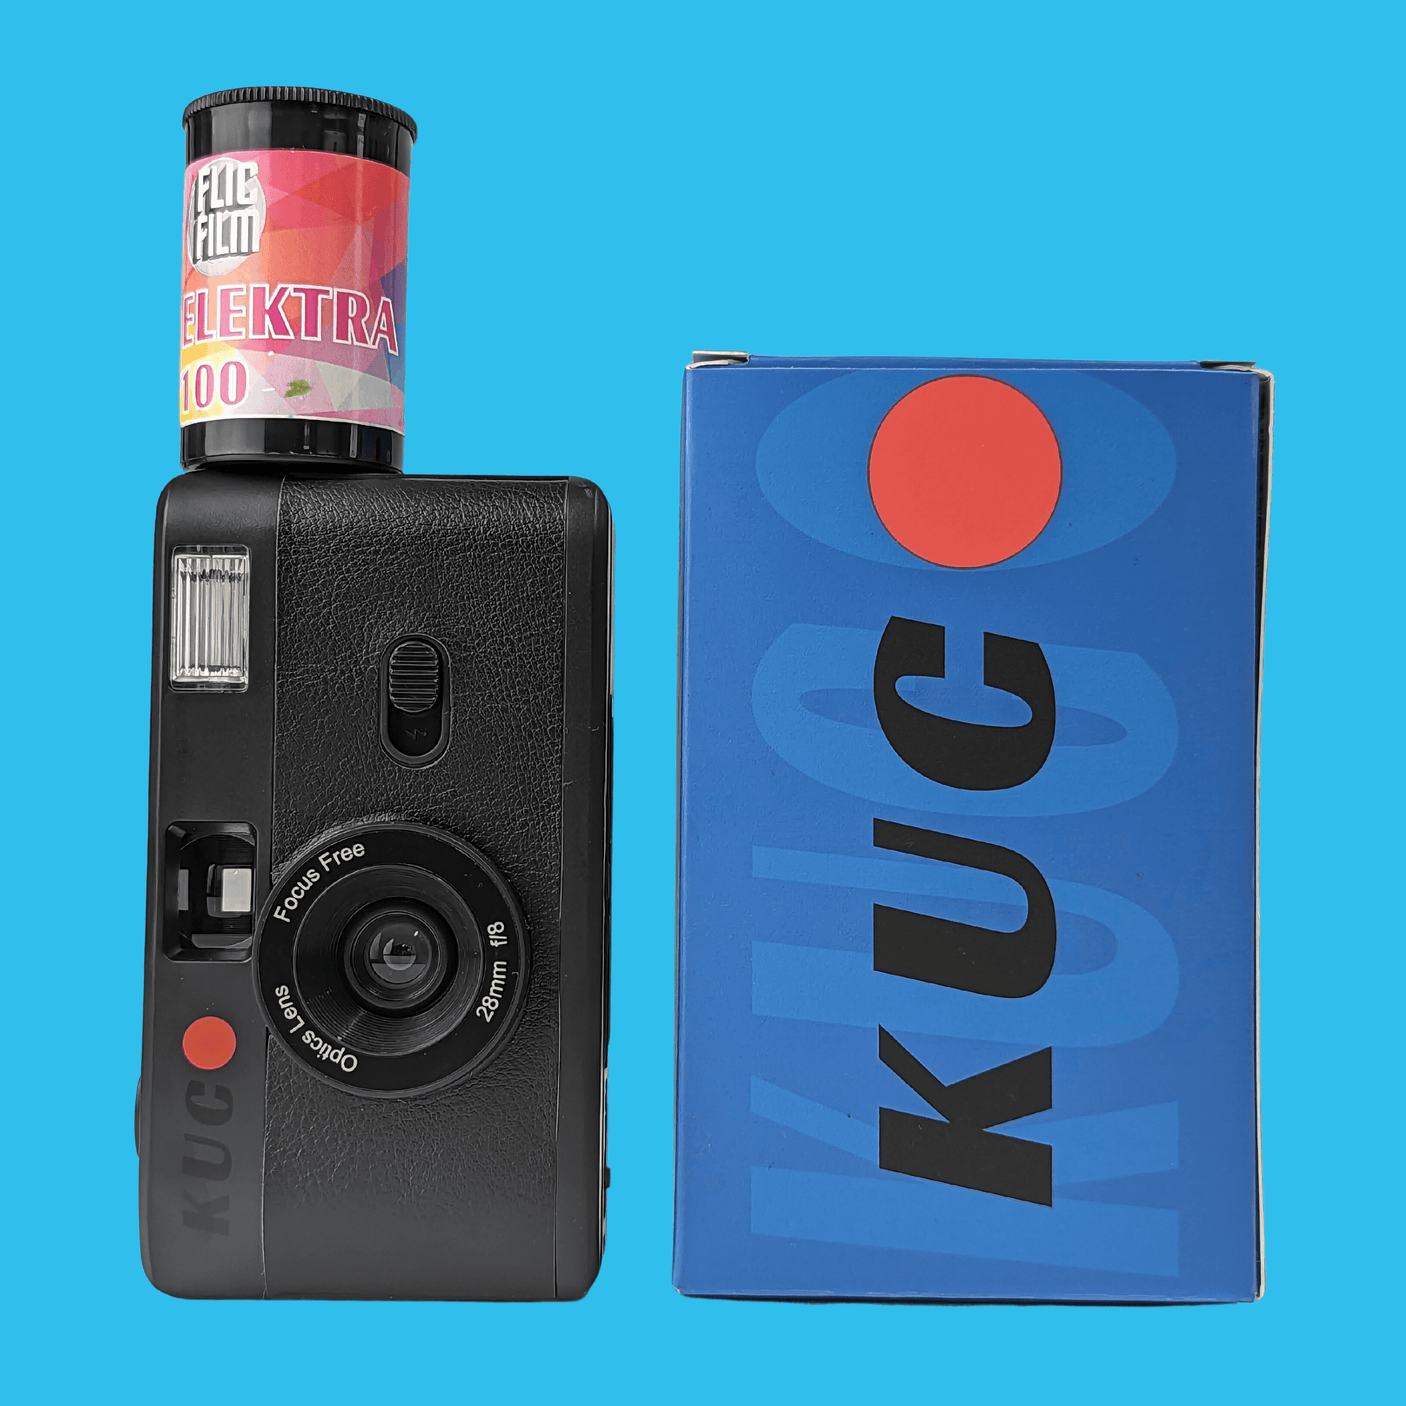 35mm Film Camera Reusable Starter Pack with Flash and 1 x 35mm Film - Black KUGO